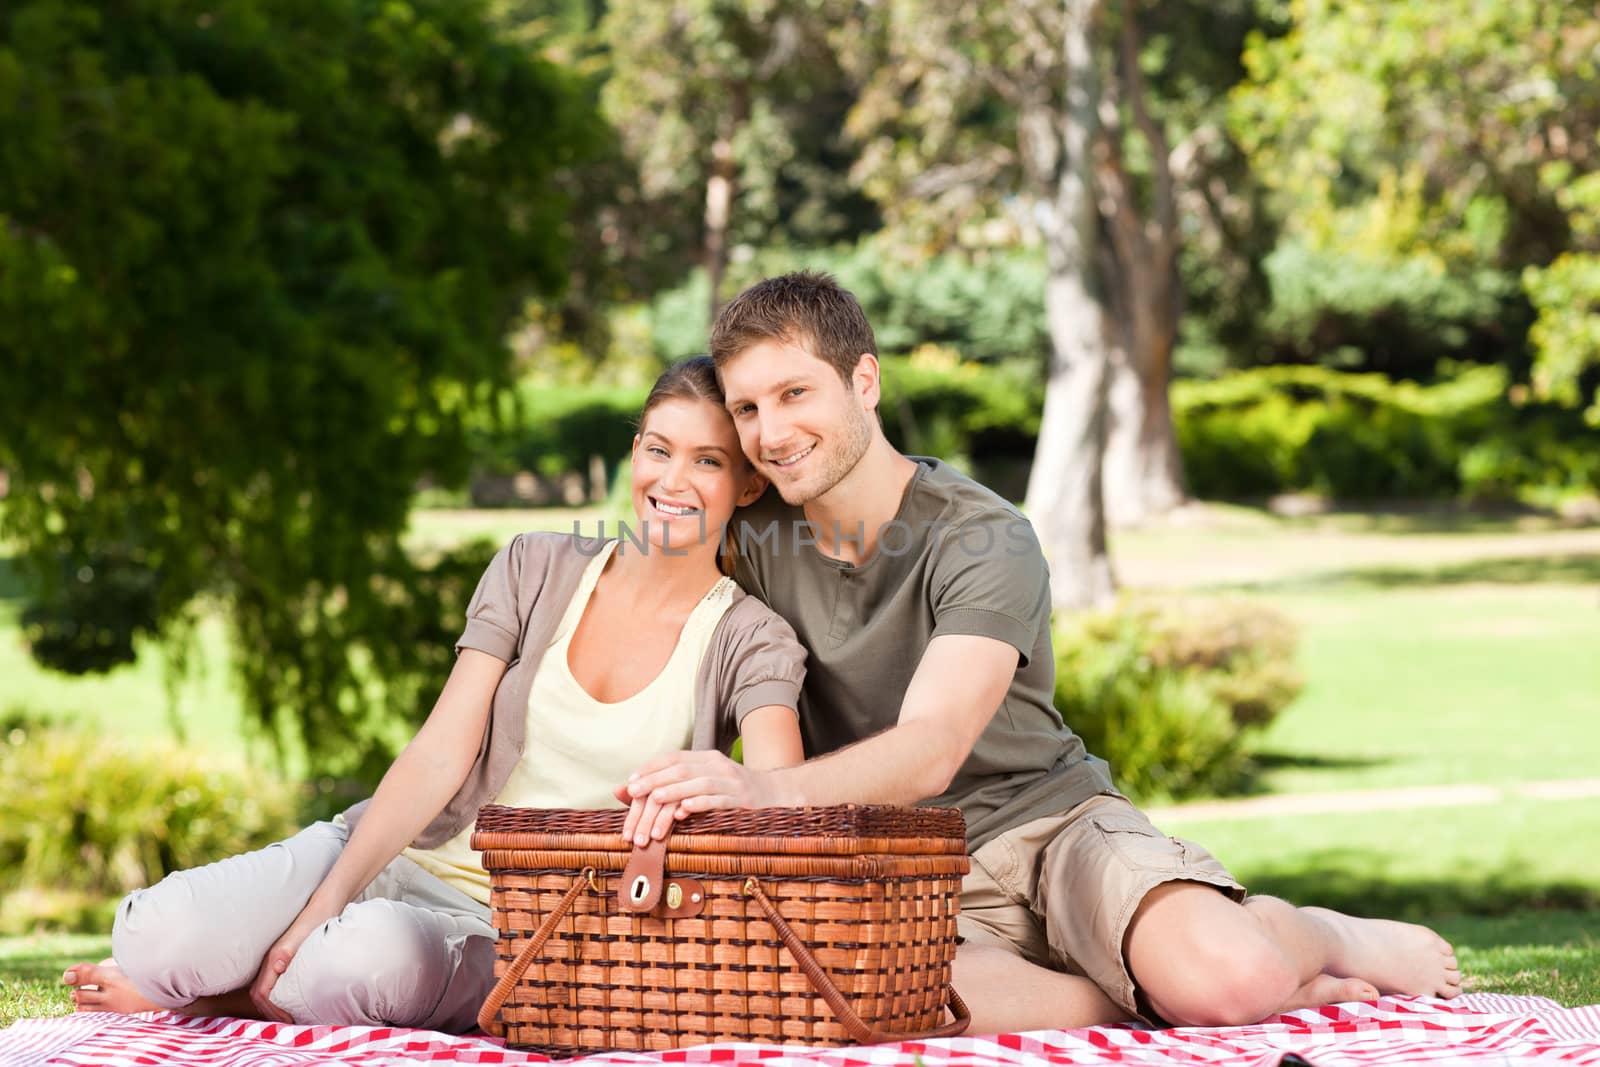 Couple picnicking in the park by Wavebreakmedia